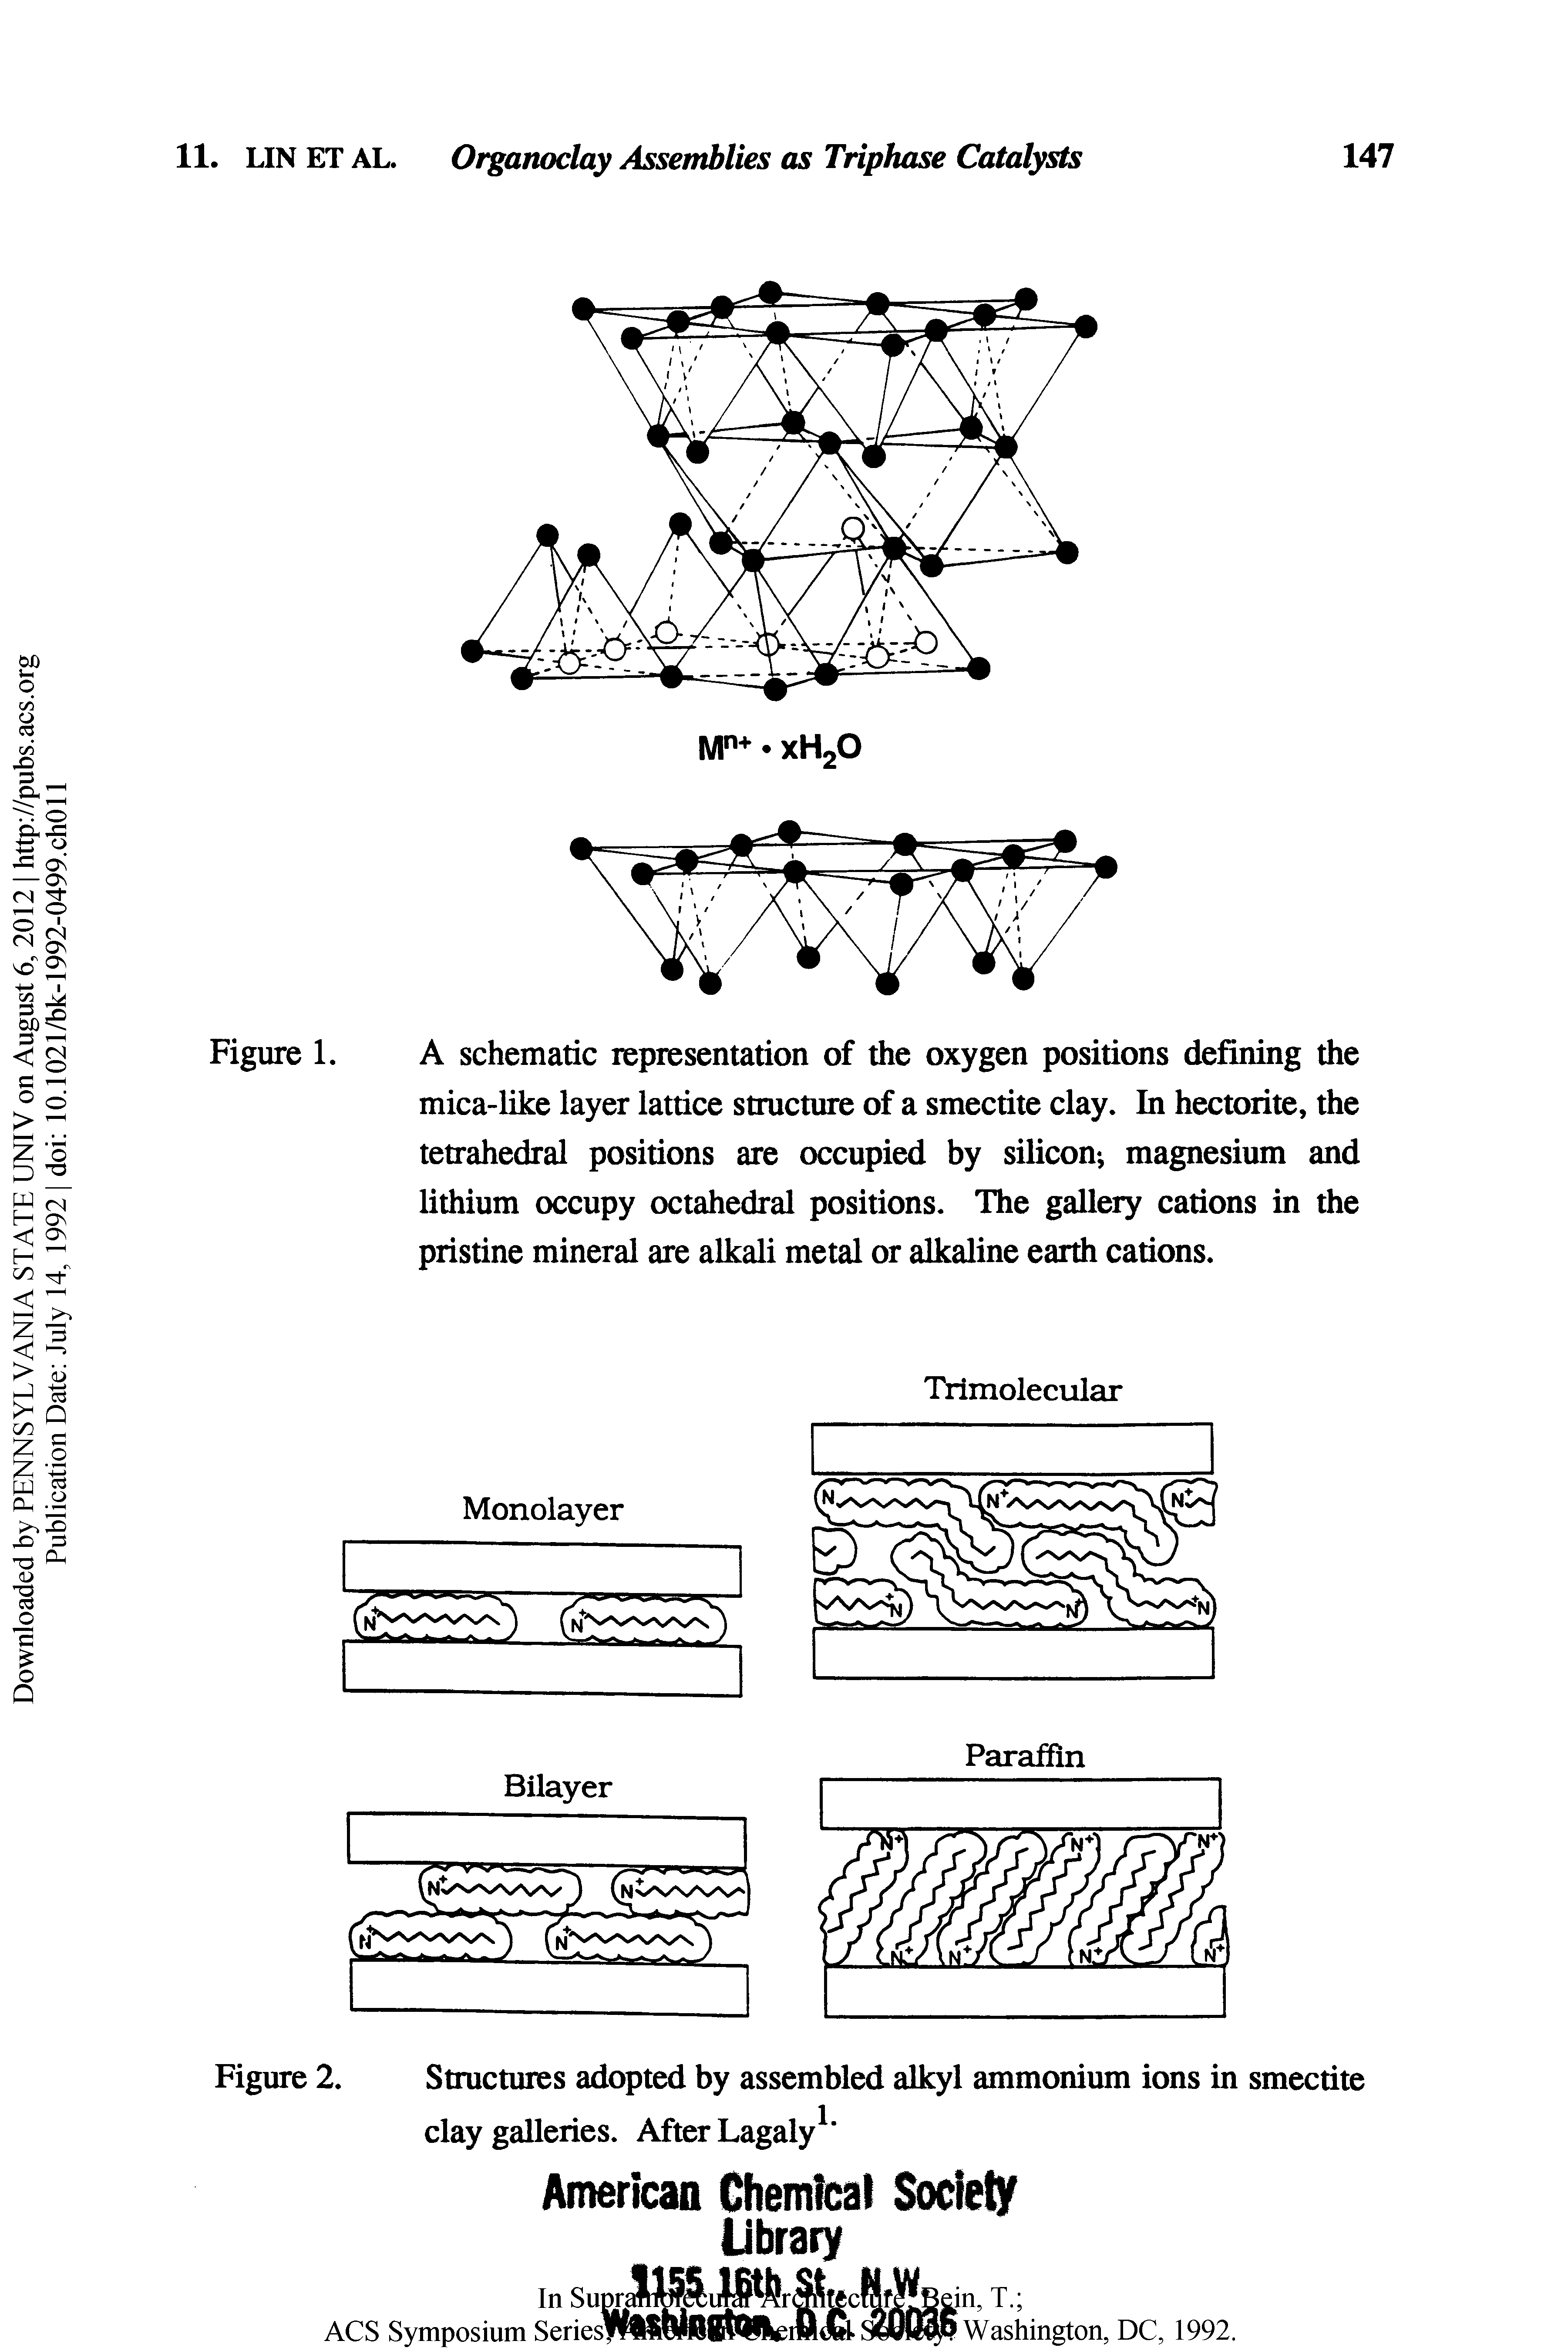 Figure 1. A schematic representation of the oxygen positions defining the mica-like layer lattice structure of a smectite clay. In hectorite, the tetrahedral positions are occupied by silicon, magnesium and lithium occupy octahedral positions. The gallery cations in the pristine mineral are alkali metal or alkaline earth cations.